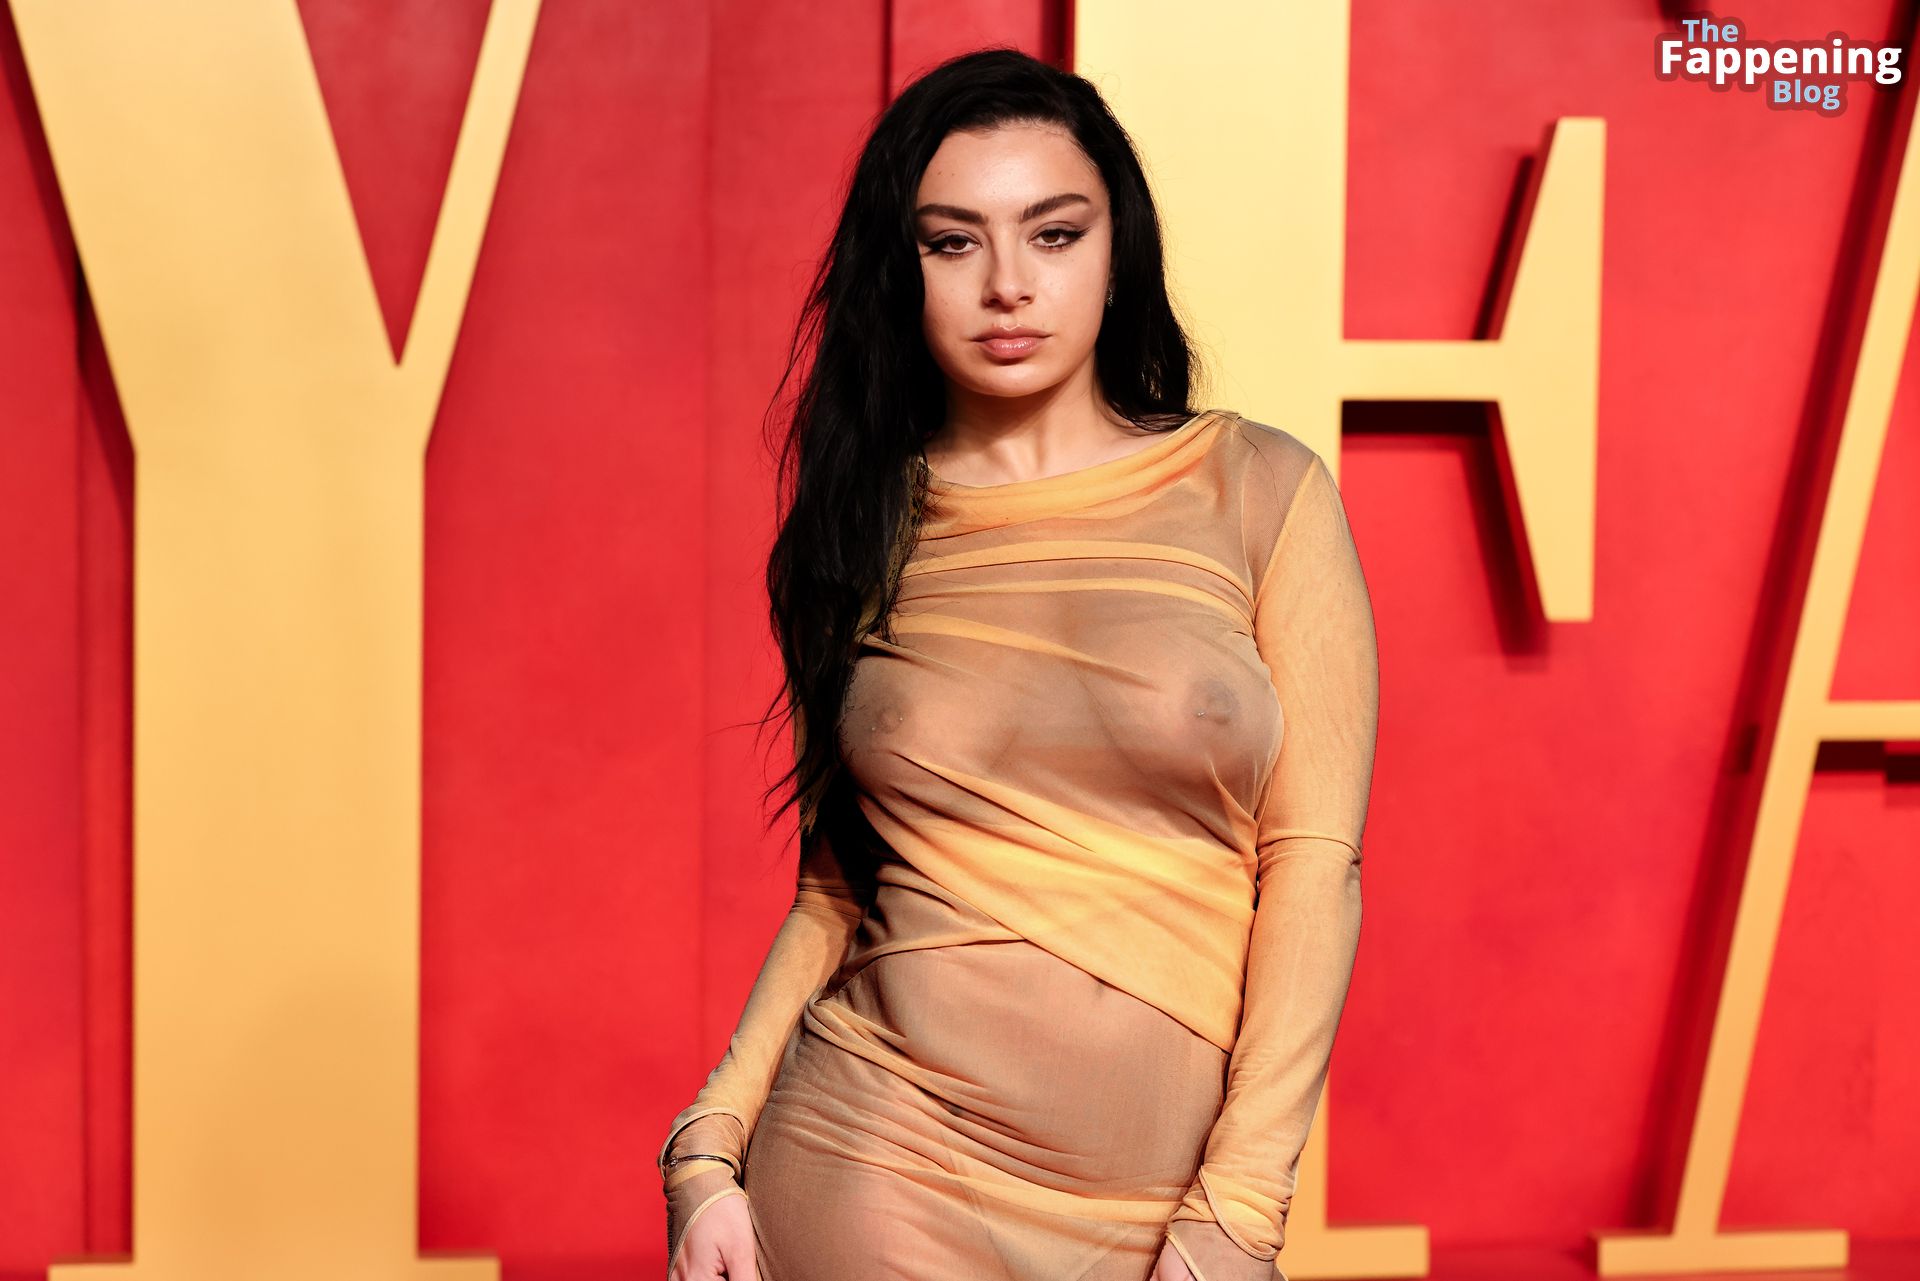 Charli-XCX-Nude-Sexy-20-The-Fappening-Blog.jpg